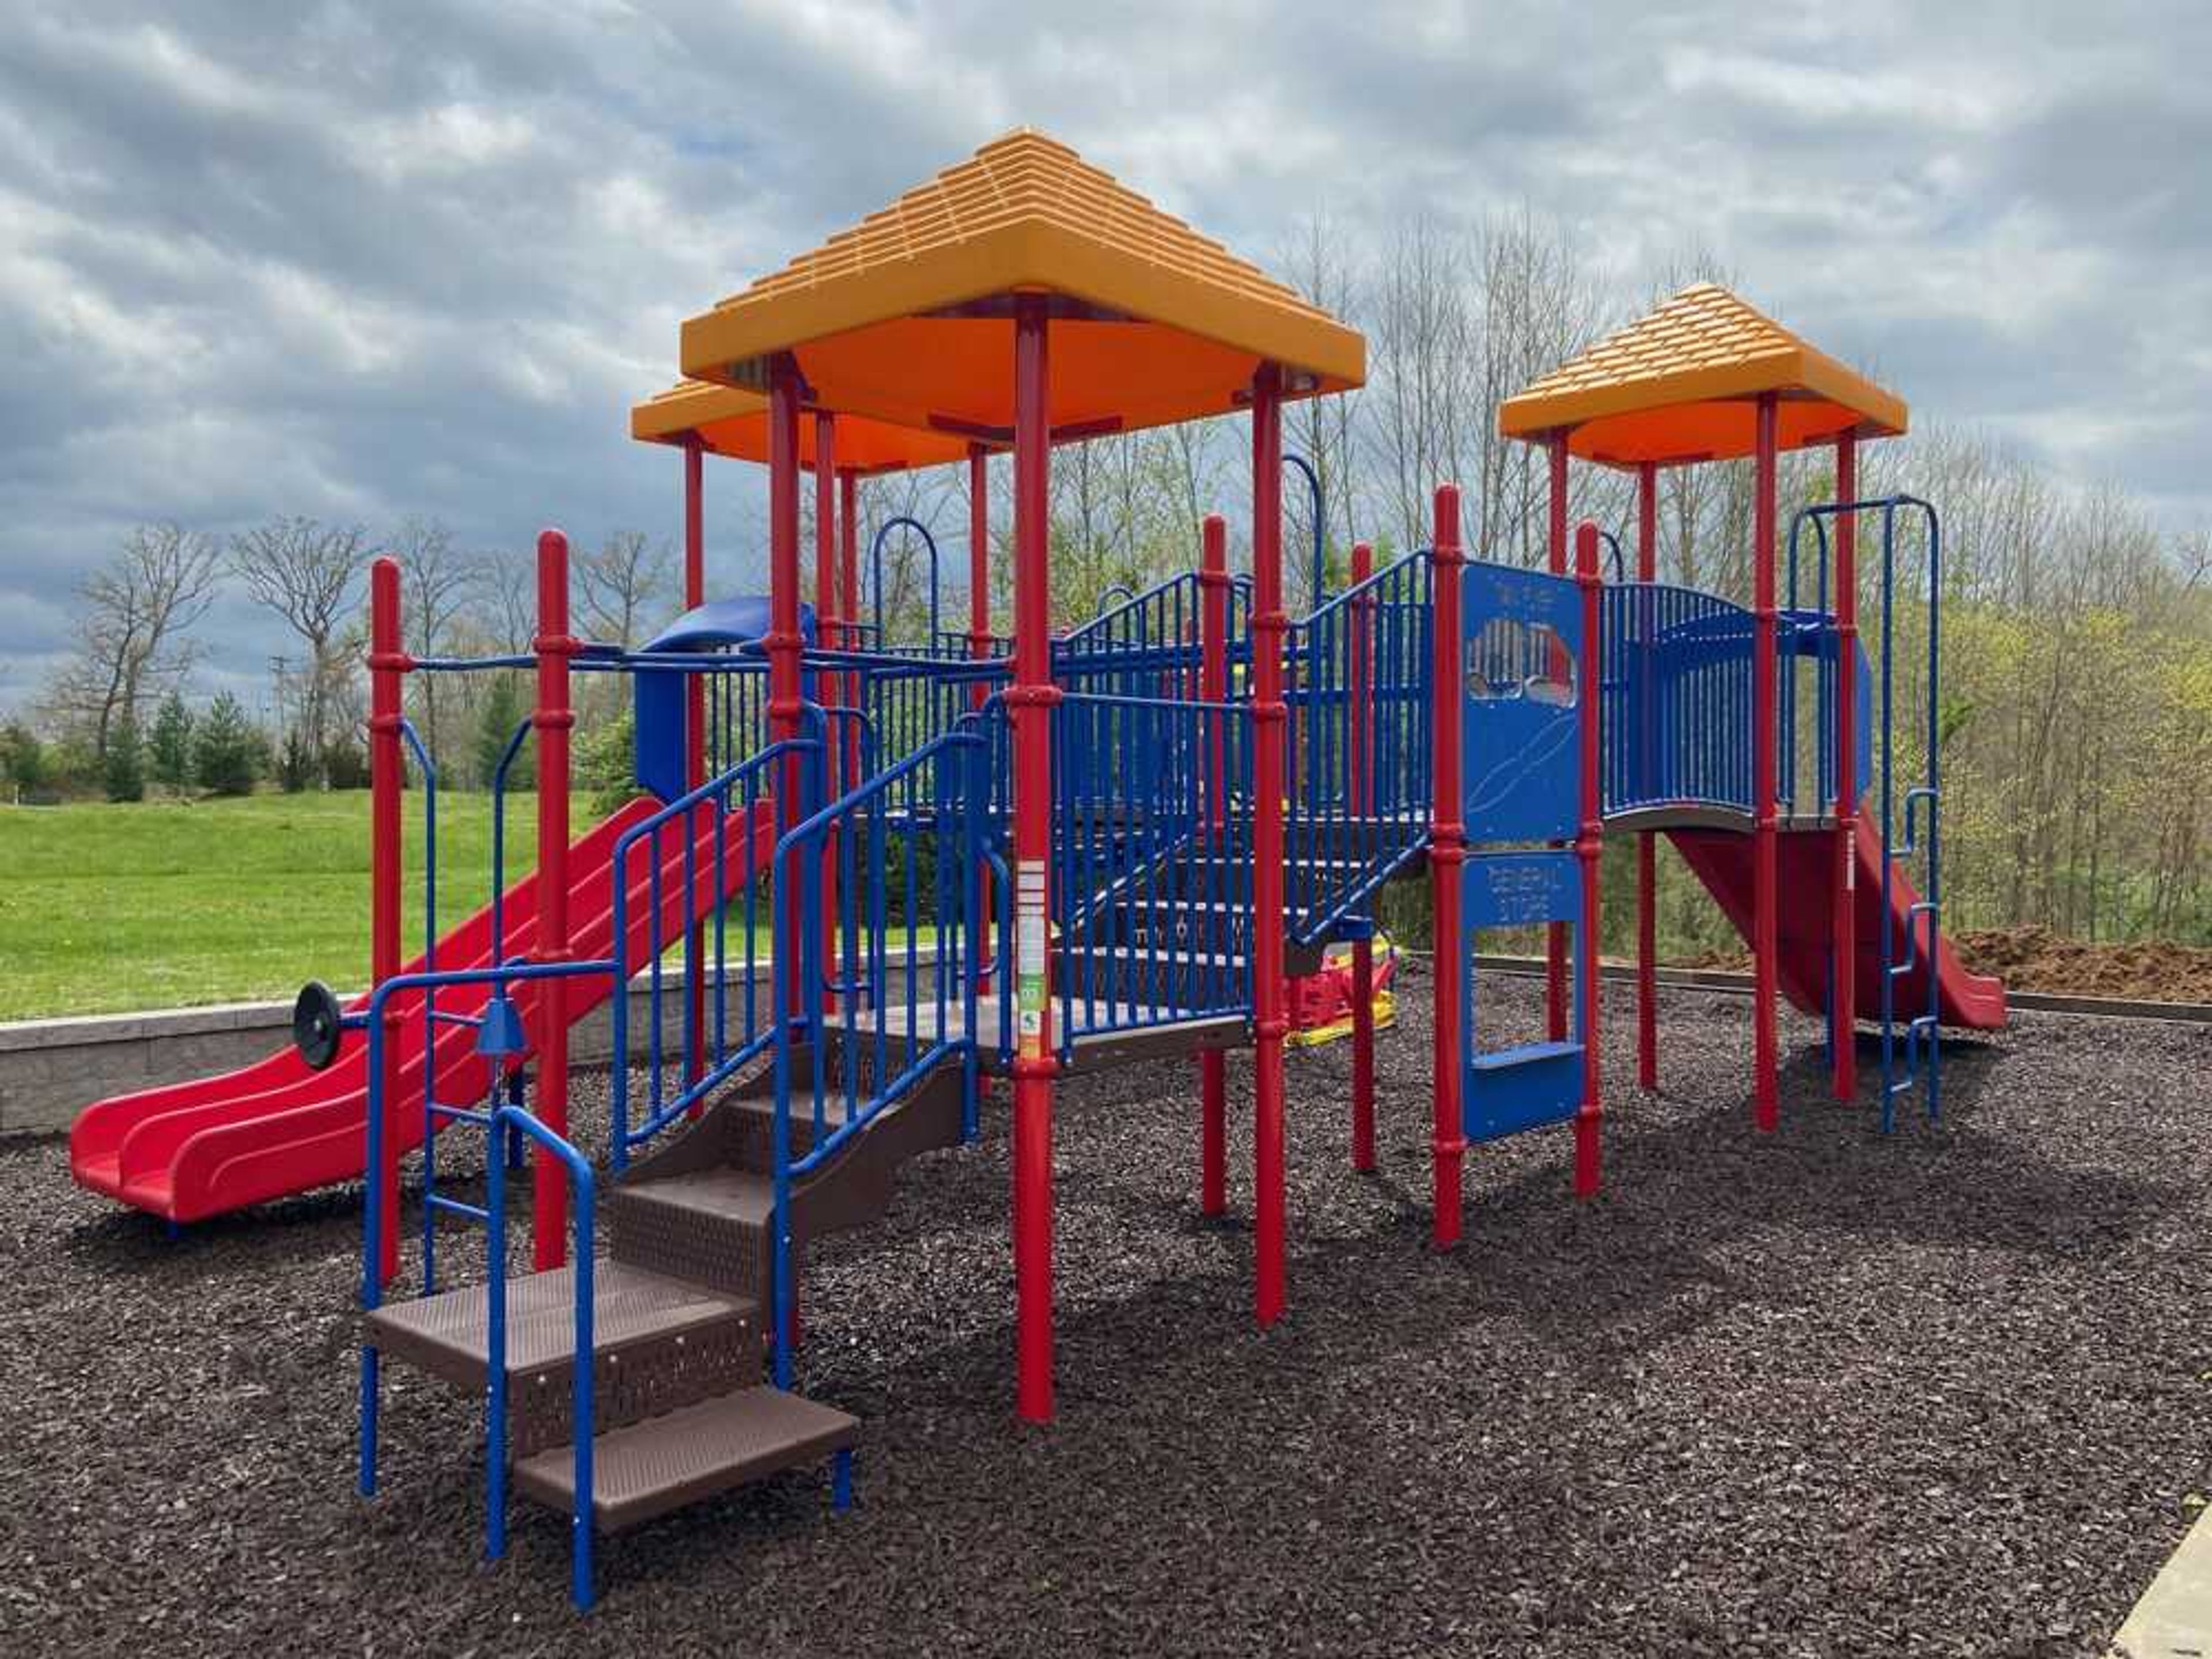 Commissioners approve concrete bid, receive playground proposals for county parks